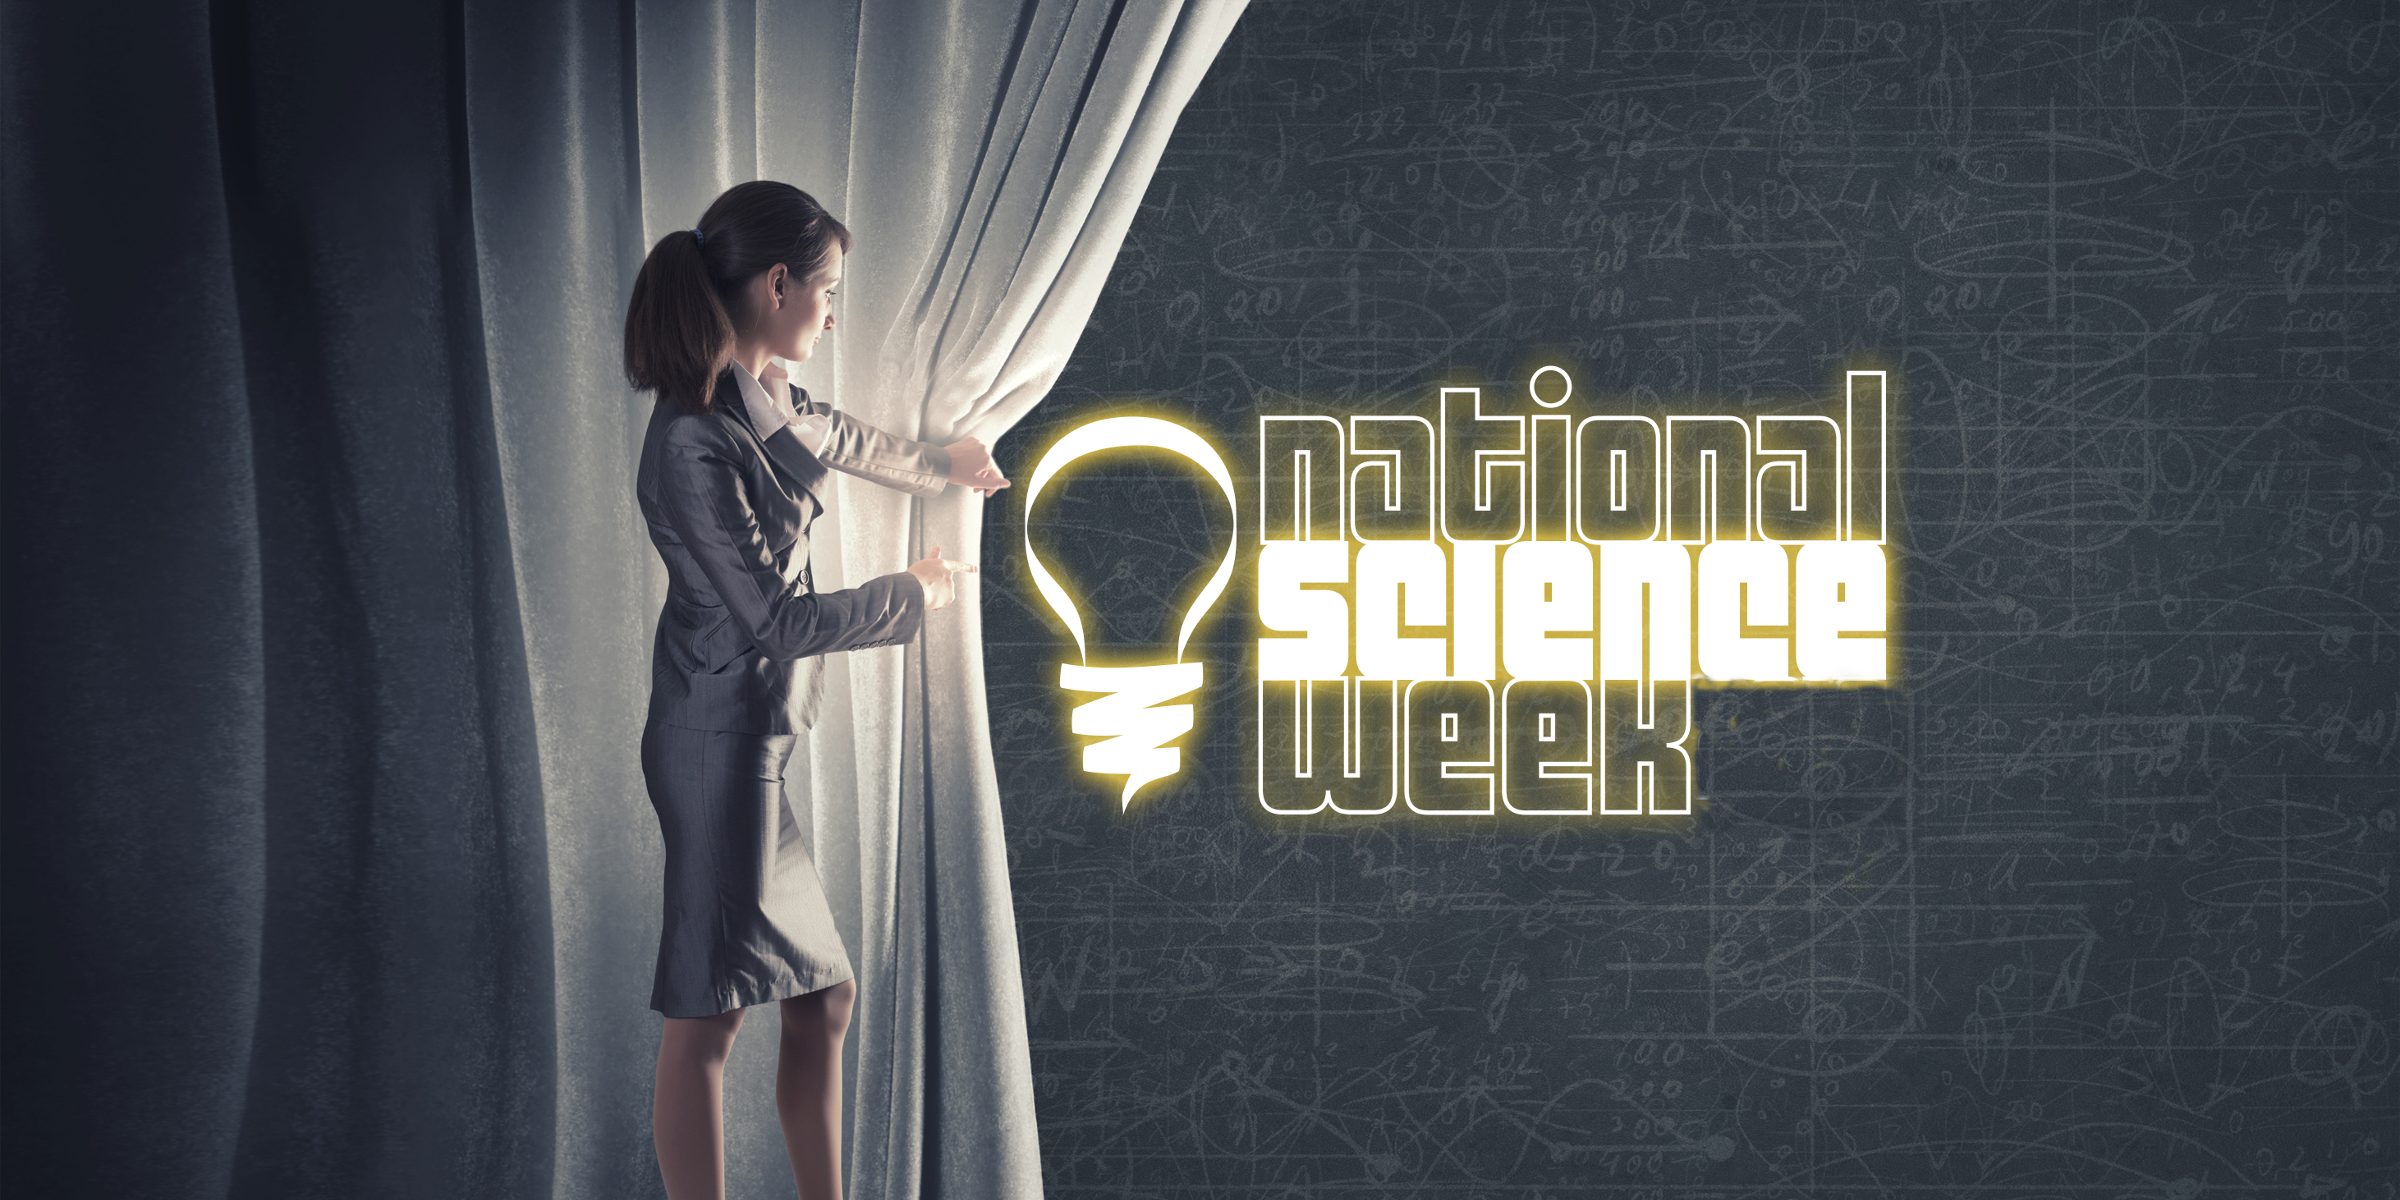 Students, It’s Time To Dive Into The National Science Week Festivities